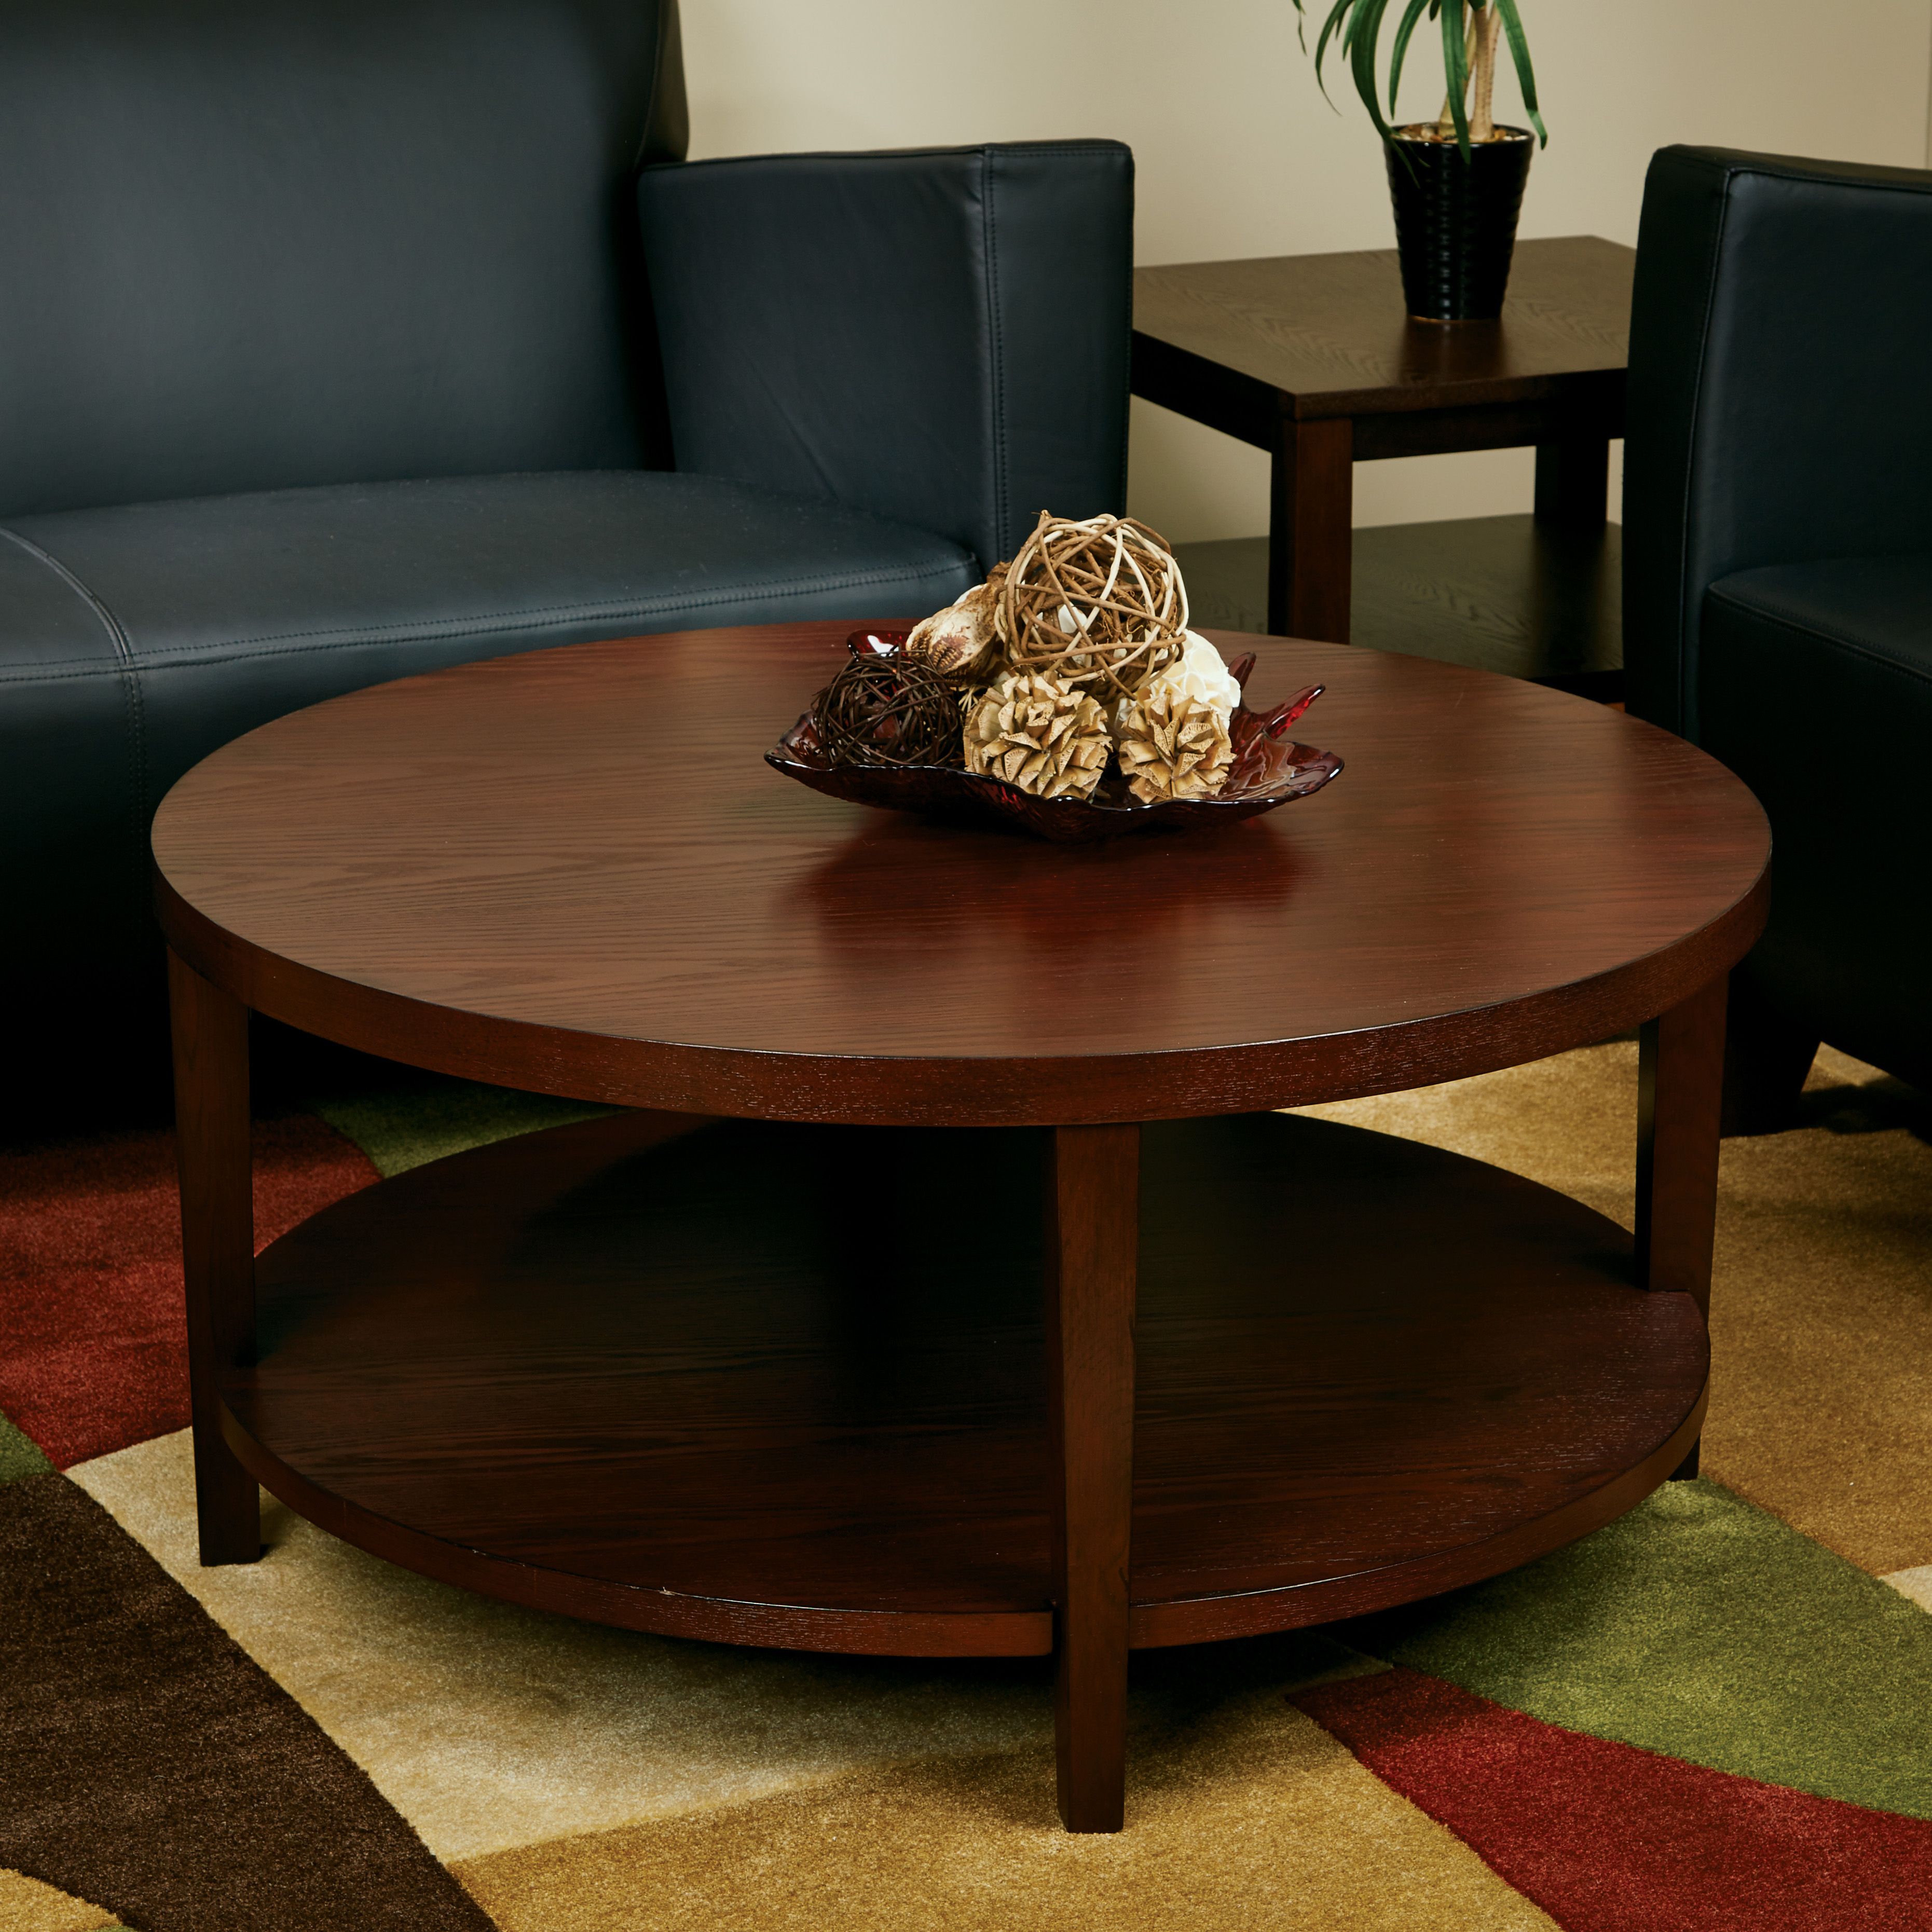 Office Star Products Merge 36 Inch Round Coffee Table Minimalist Brown Lacquered Wooden Coffee Table Design Ideas  (View 8 of 10)